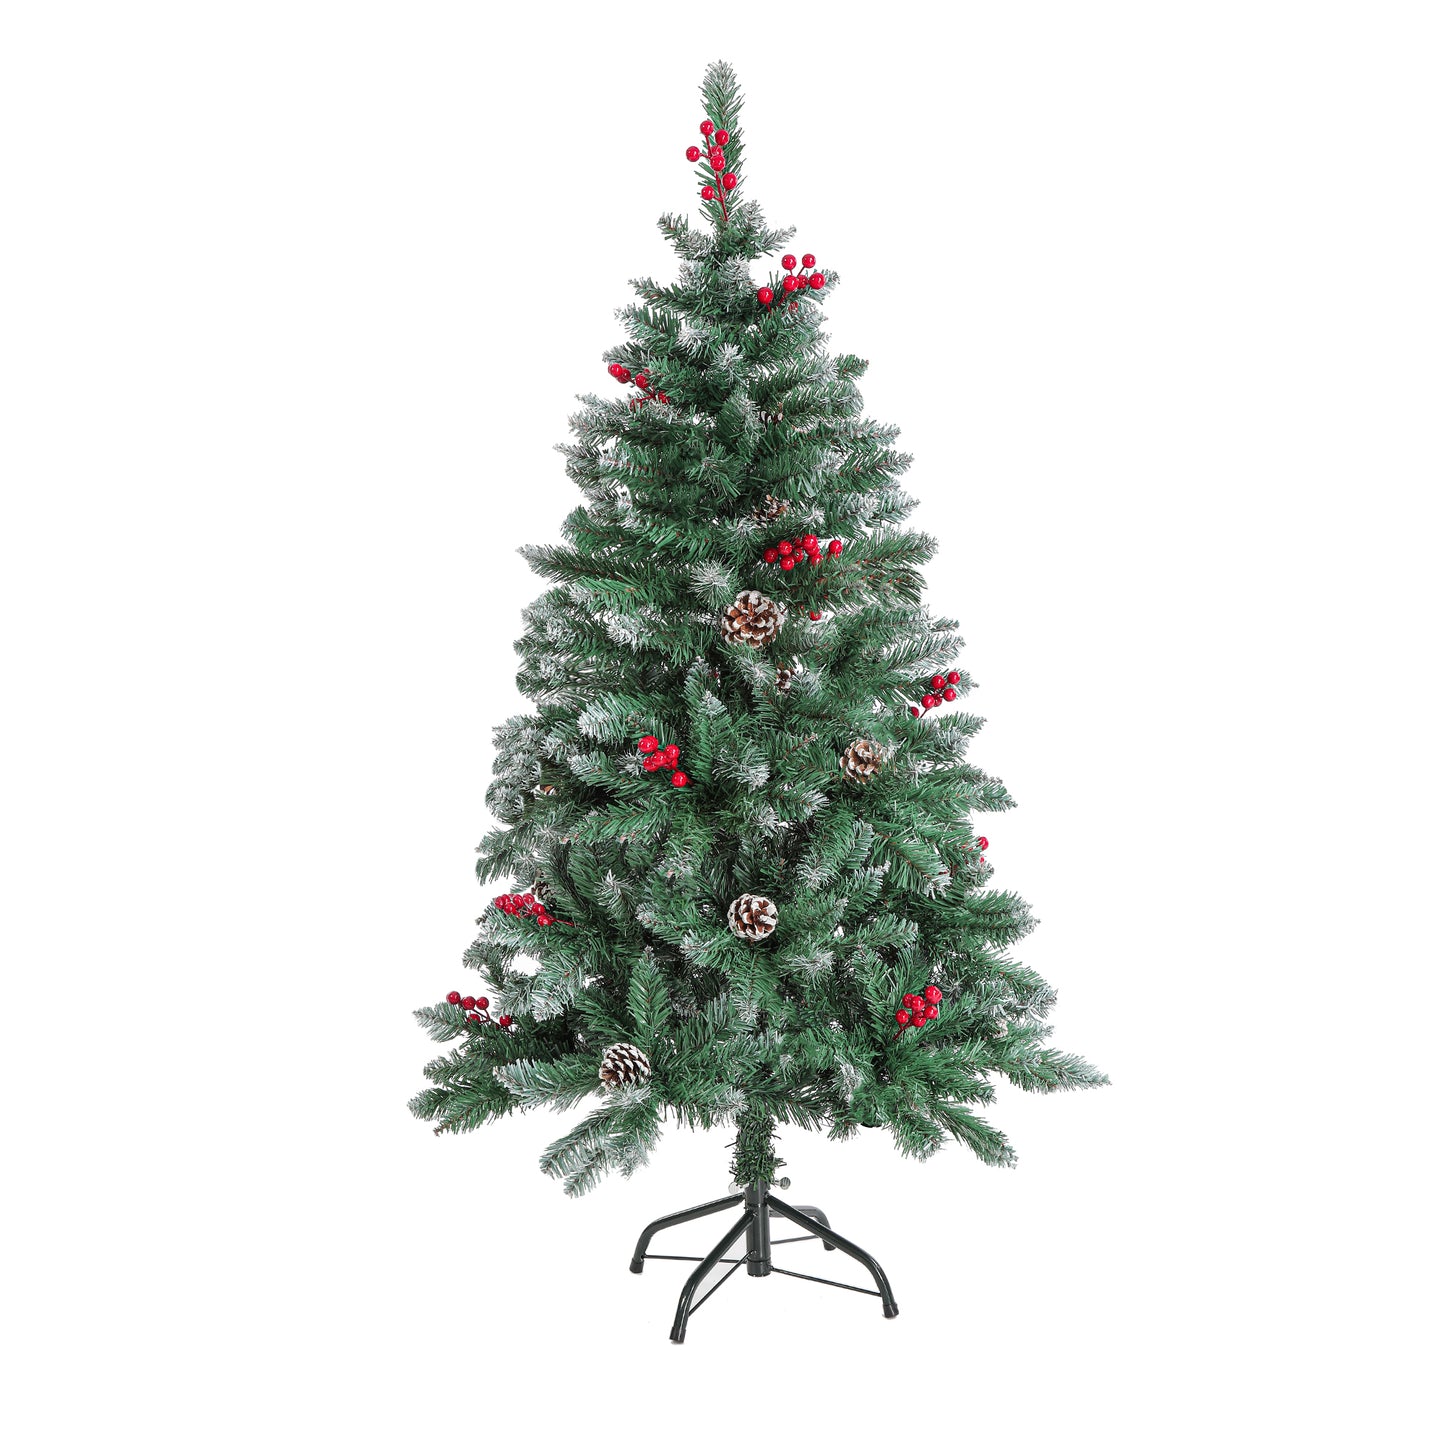 4ft Pre-Lit Green Artificial Christmas Tree with LED Lights, Pinecones, and Berries